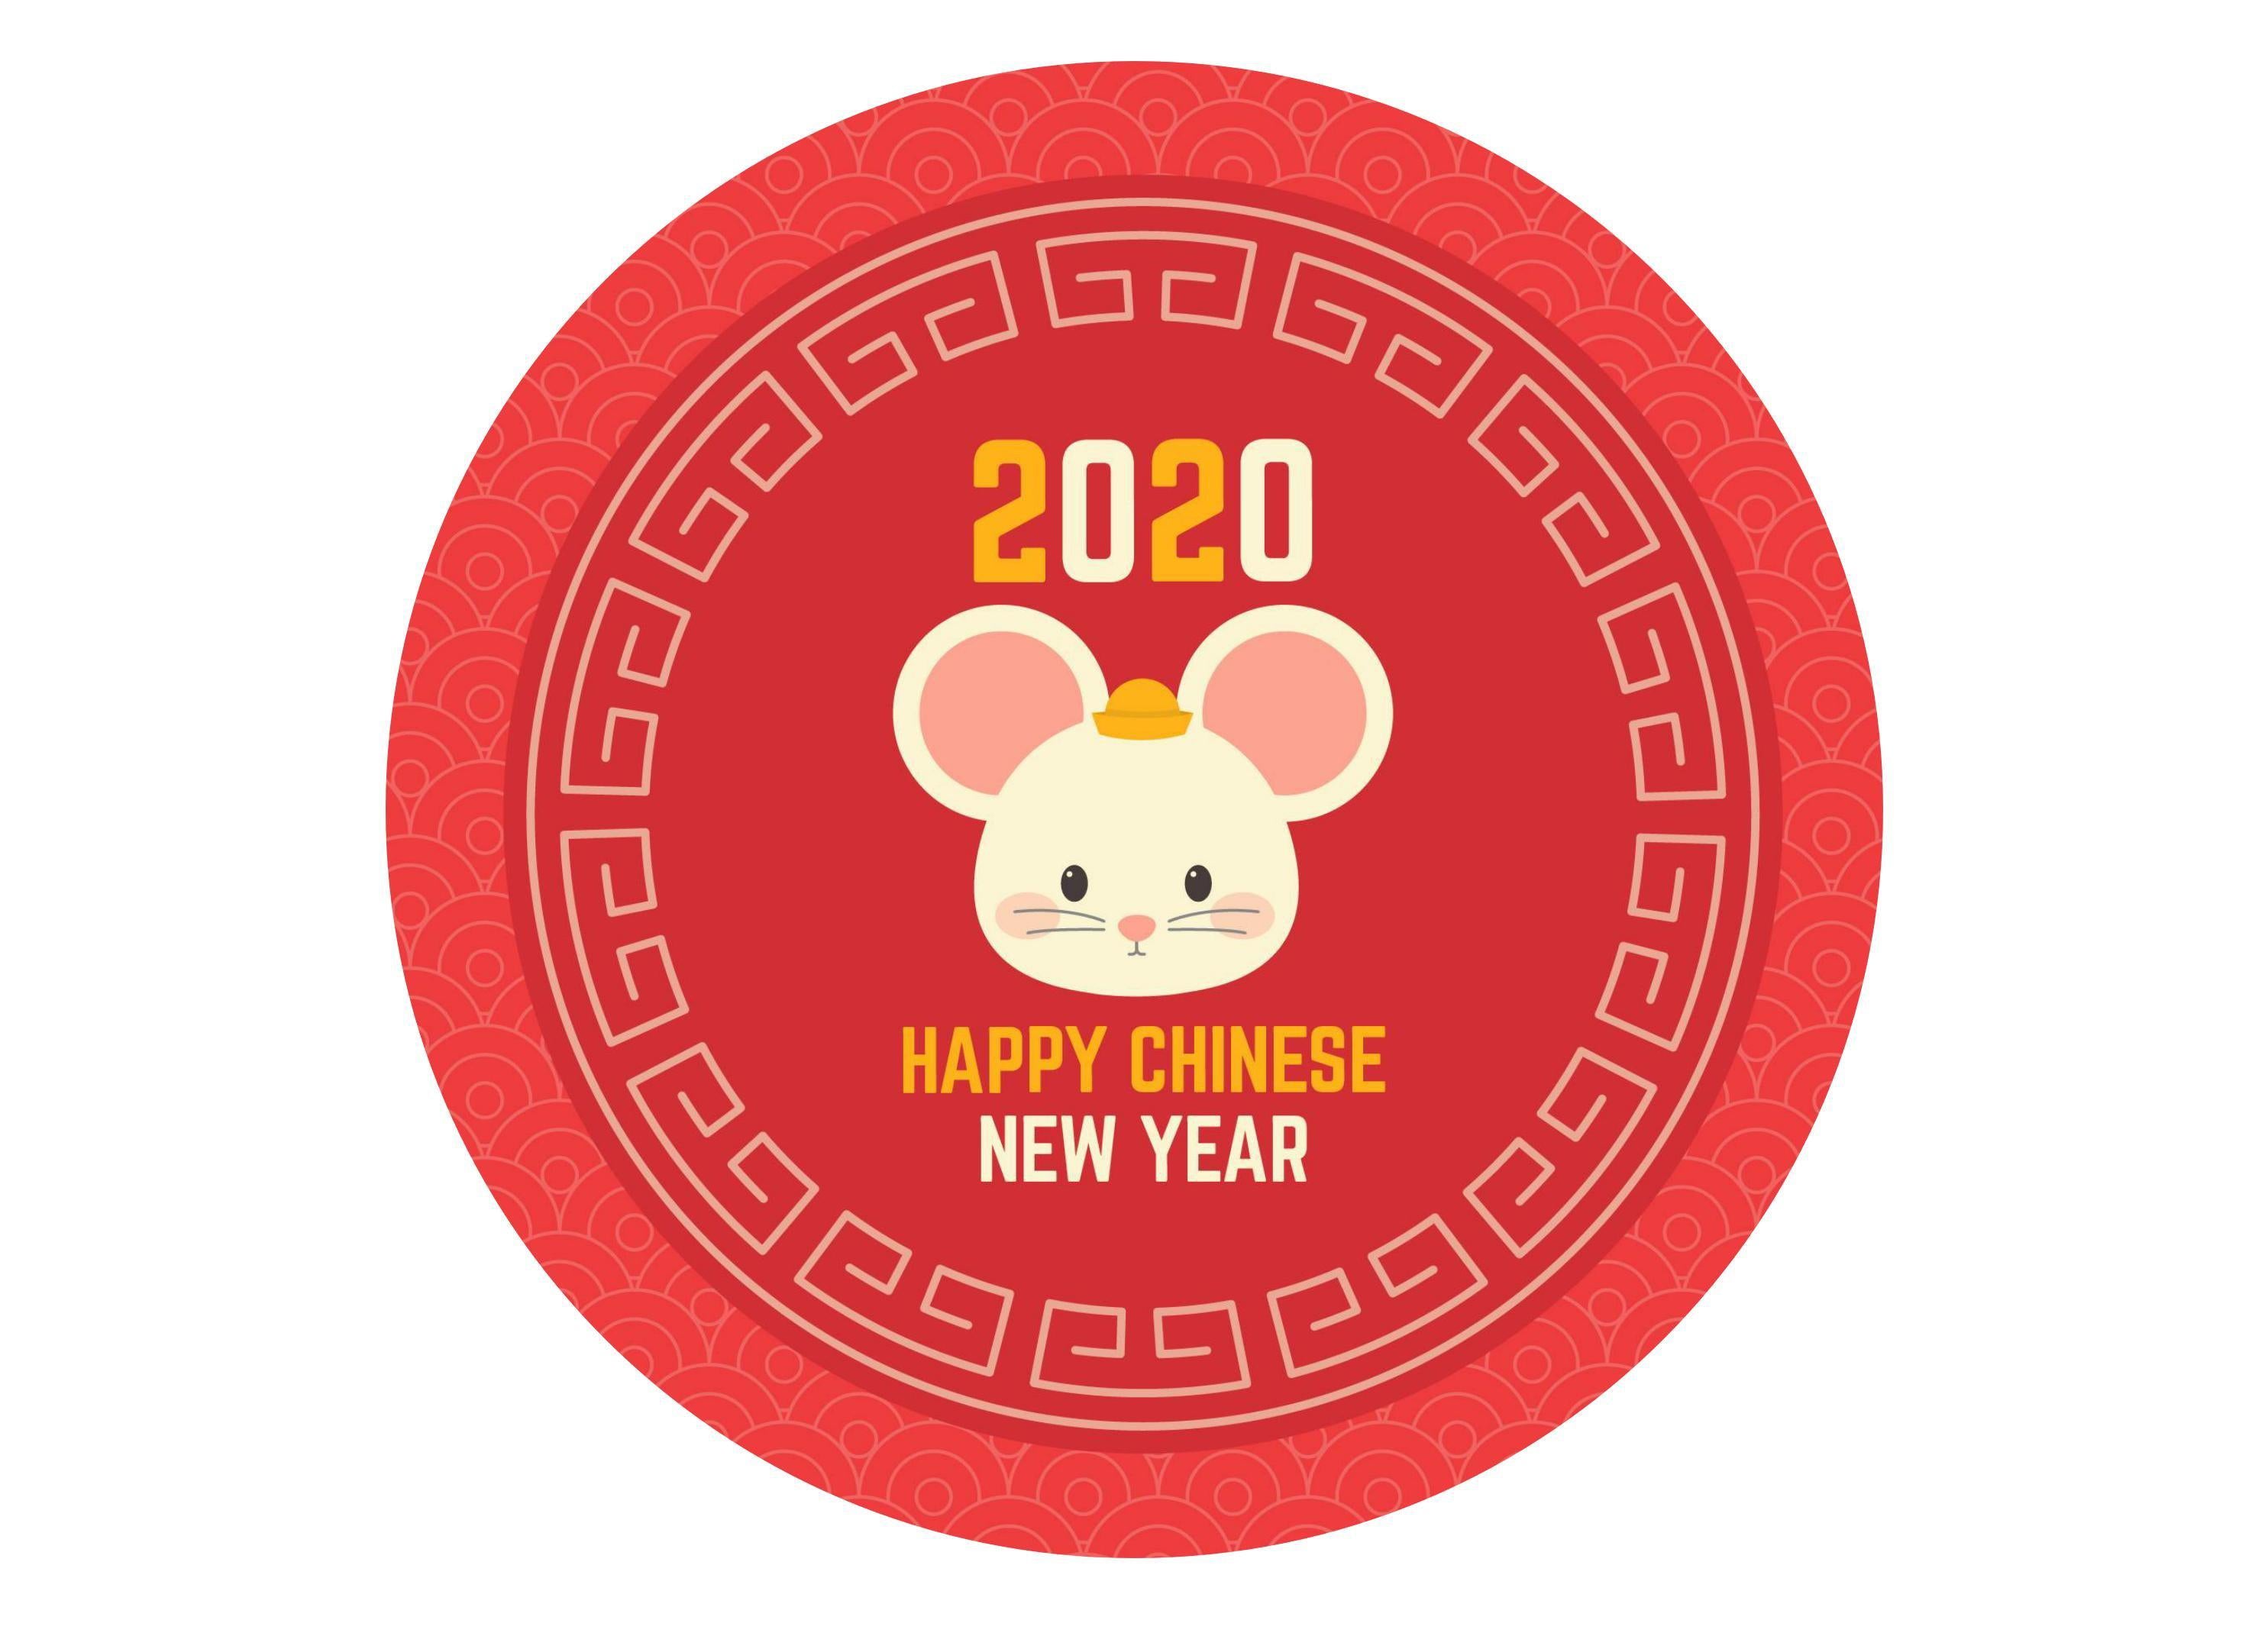 Large printed cake topper celebrating 2020 - the Year of the Rat for Chinese New Year